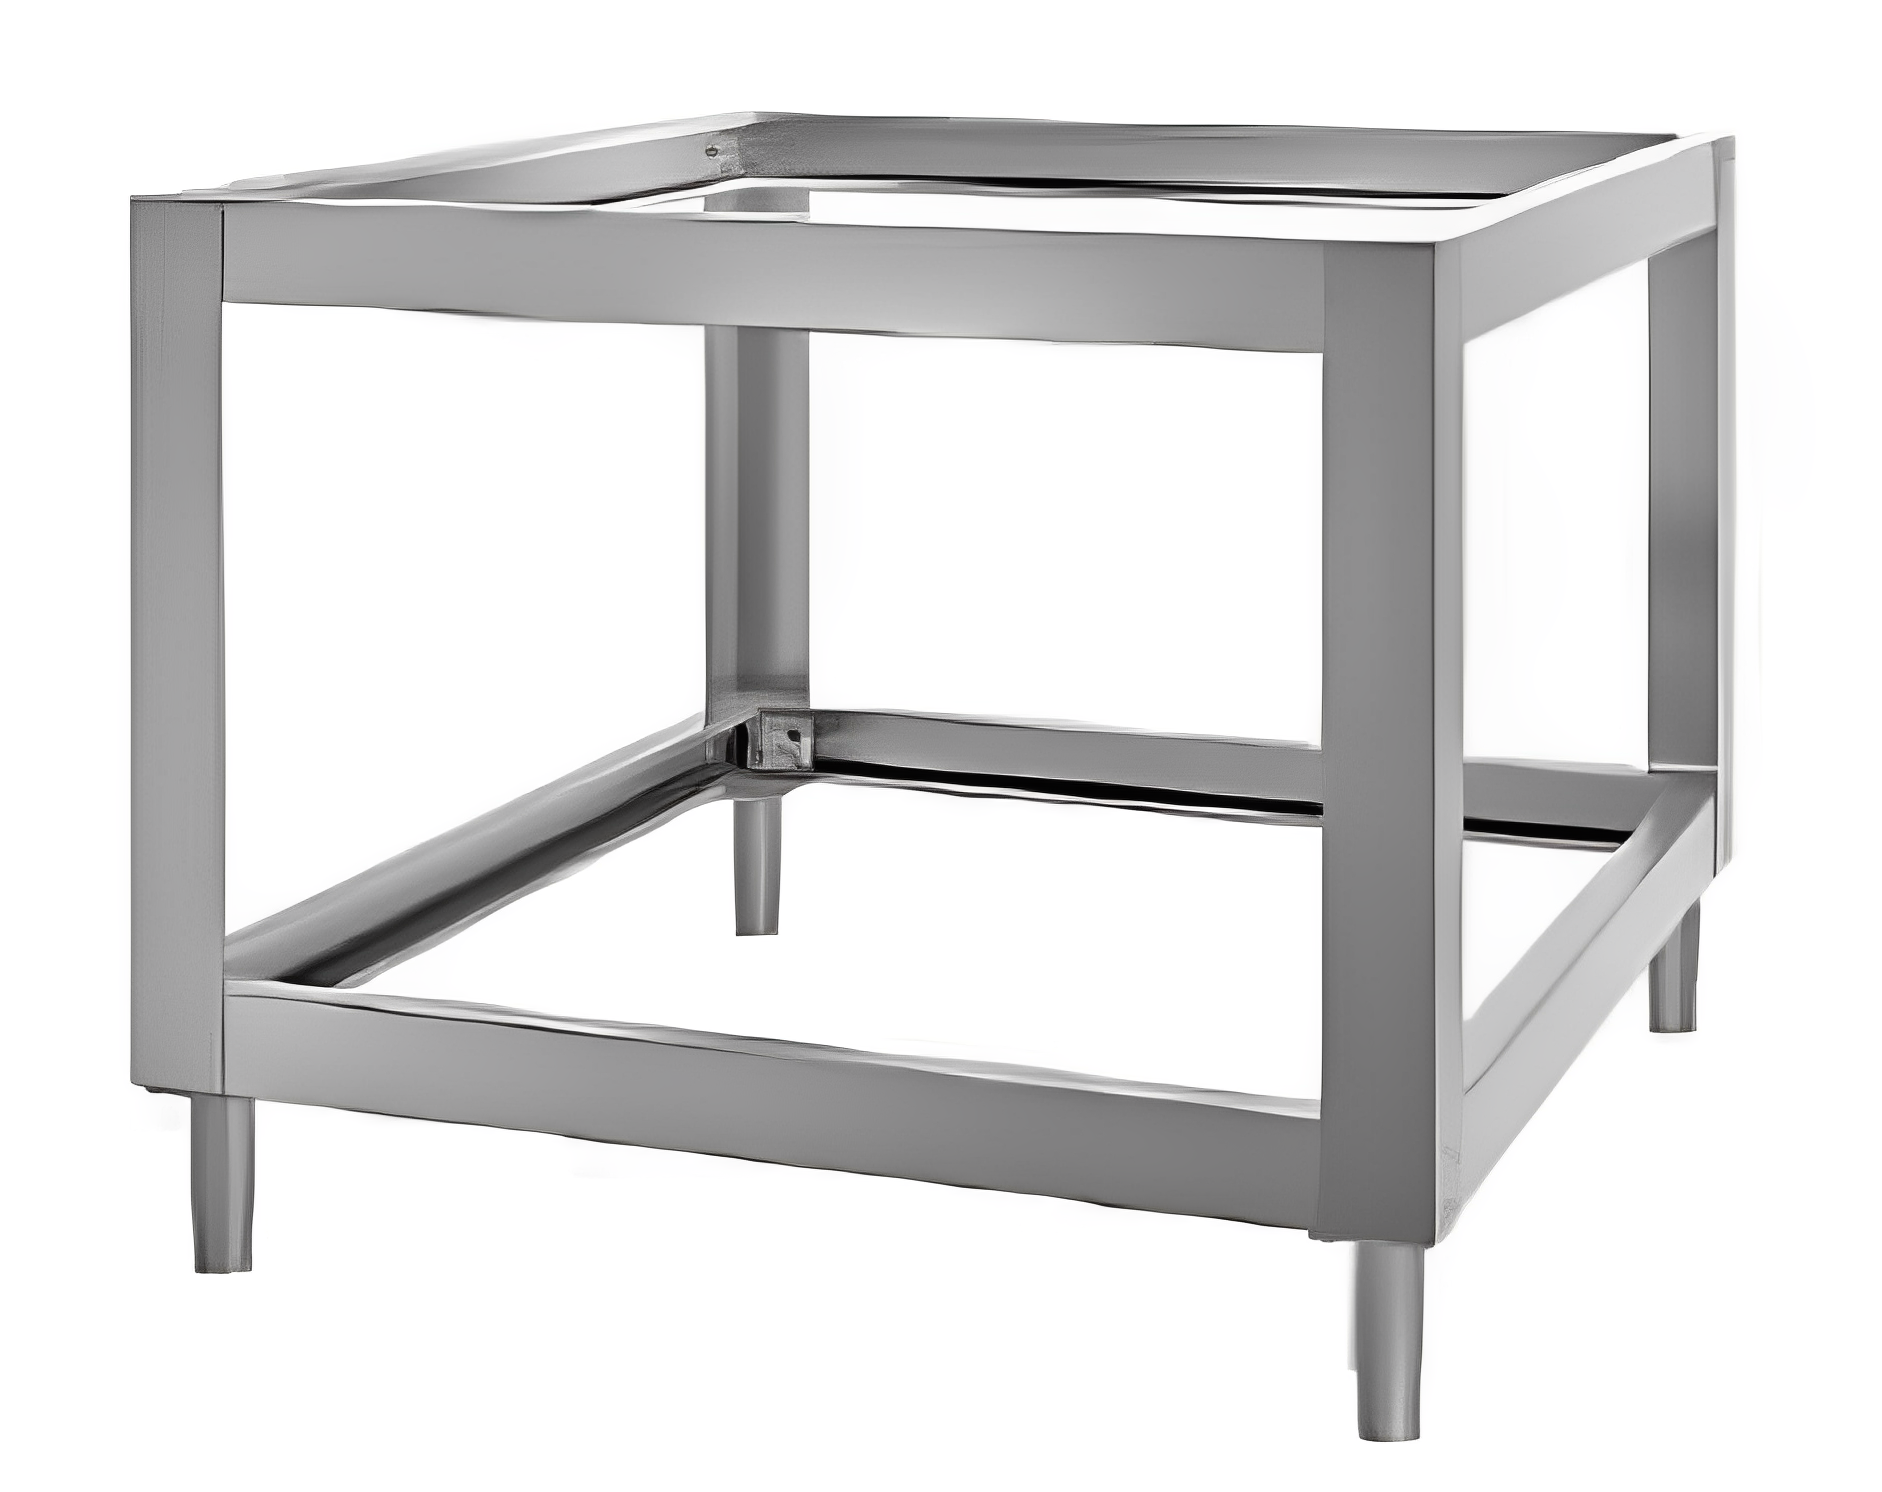 PIZZAGROUP Entry Max S4 Stands in stainless steel